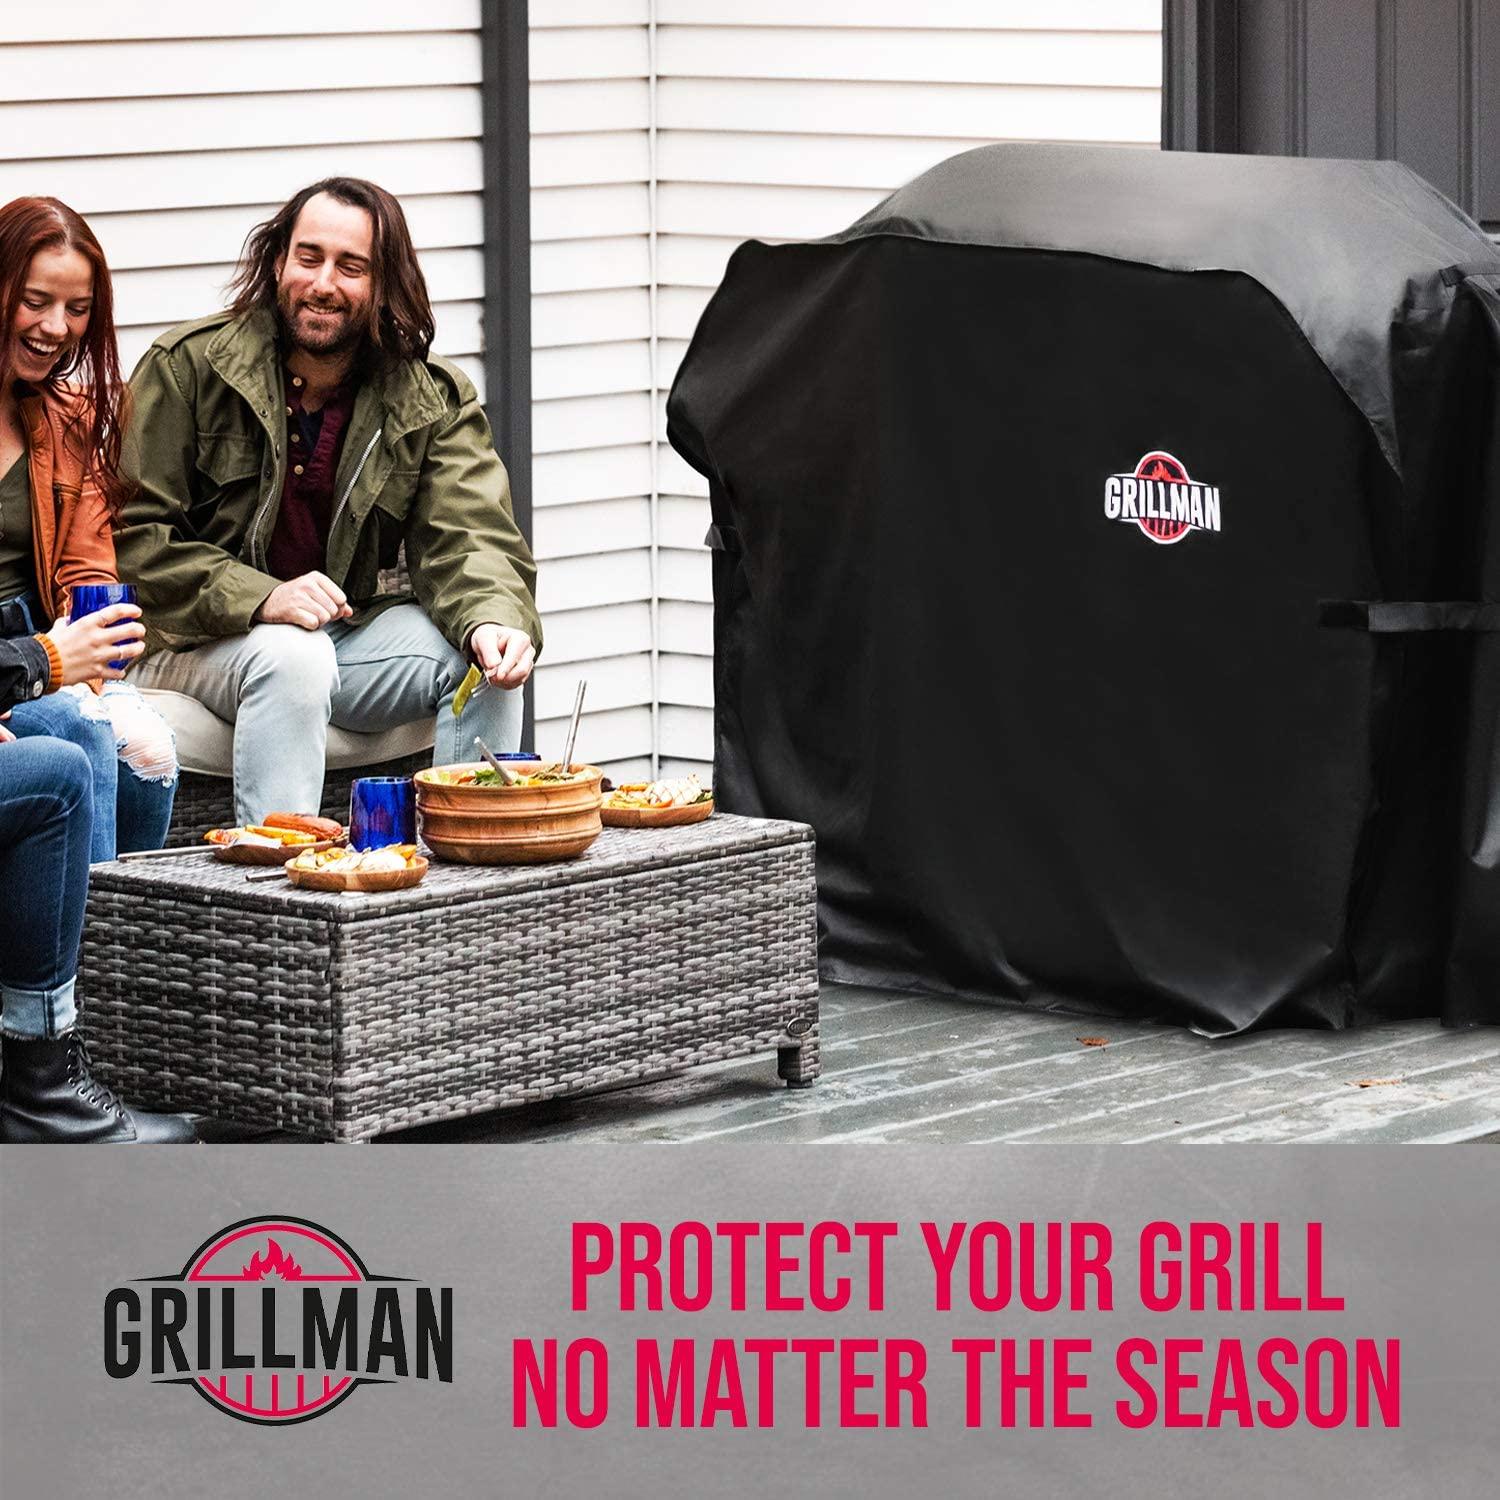 Grillman Premium Grill Cover for Outdoor Grill, BBQ Grill Cover, Rip-Proof, Waterproof, Top Heavy-Duty Large Grill Covers for Outside, Barbecue Cover & Gas Grill Covers (72" L x 26" W x 51" H, Black) - CookCave